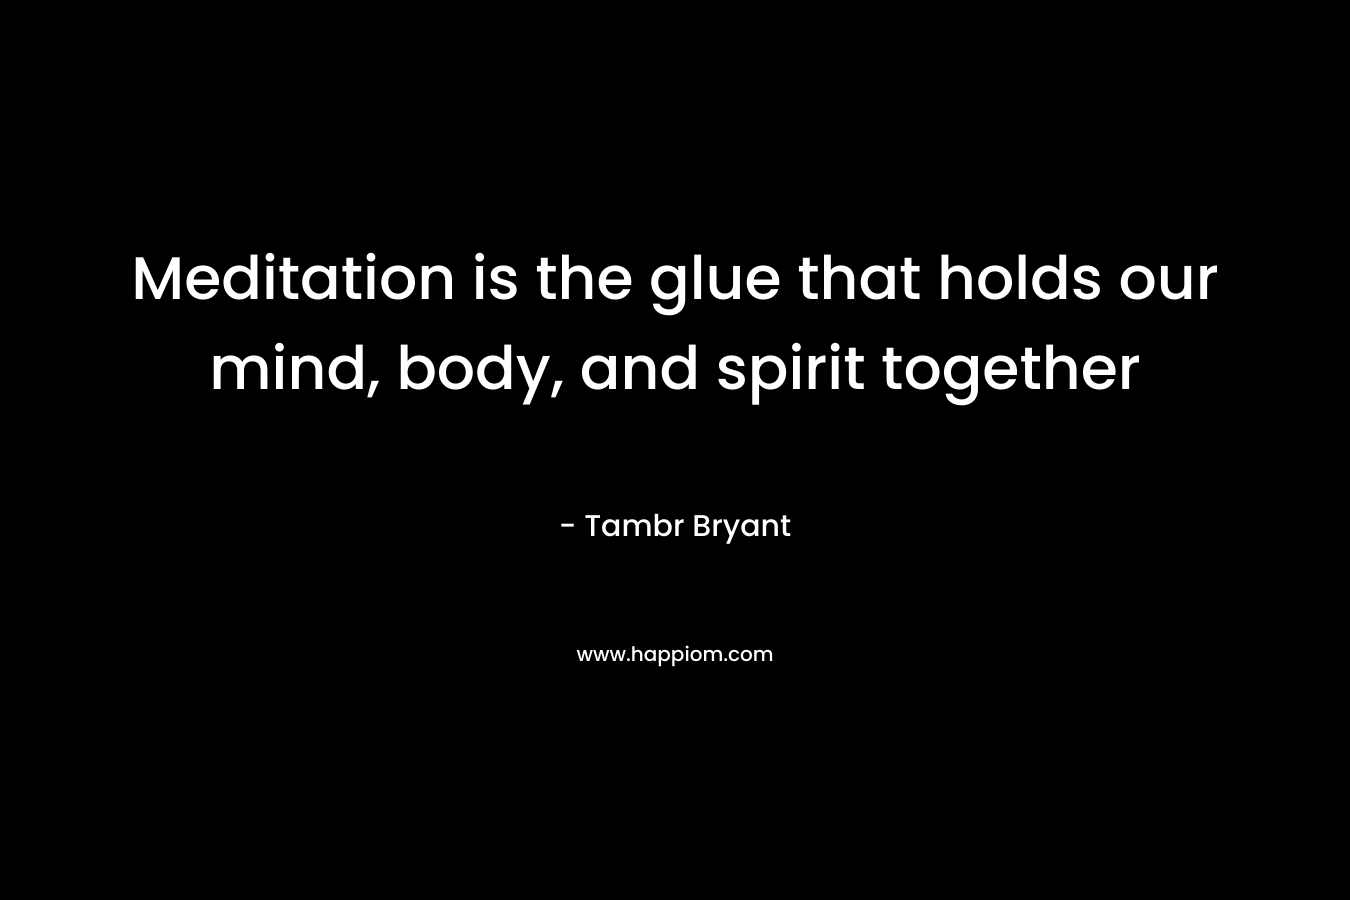 Meditation is the glue that holds our mind, body, and spirit together